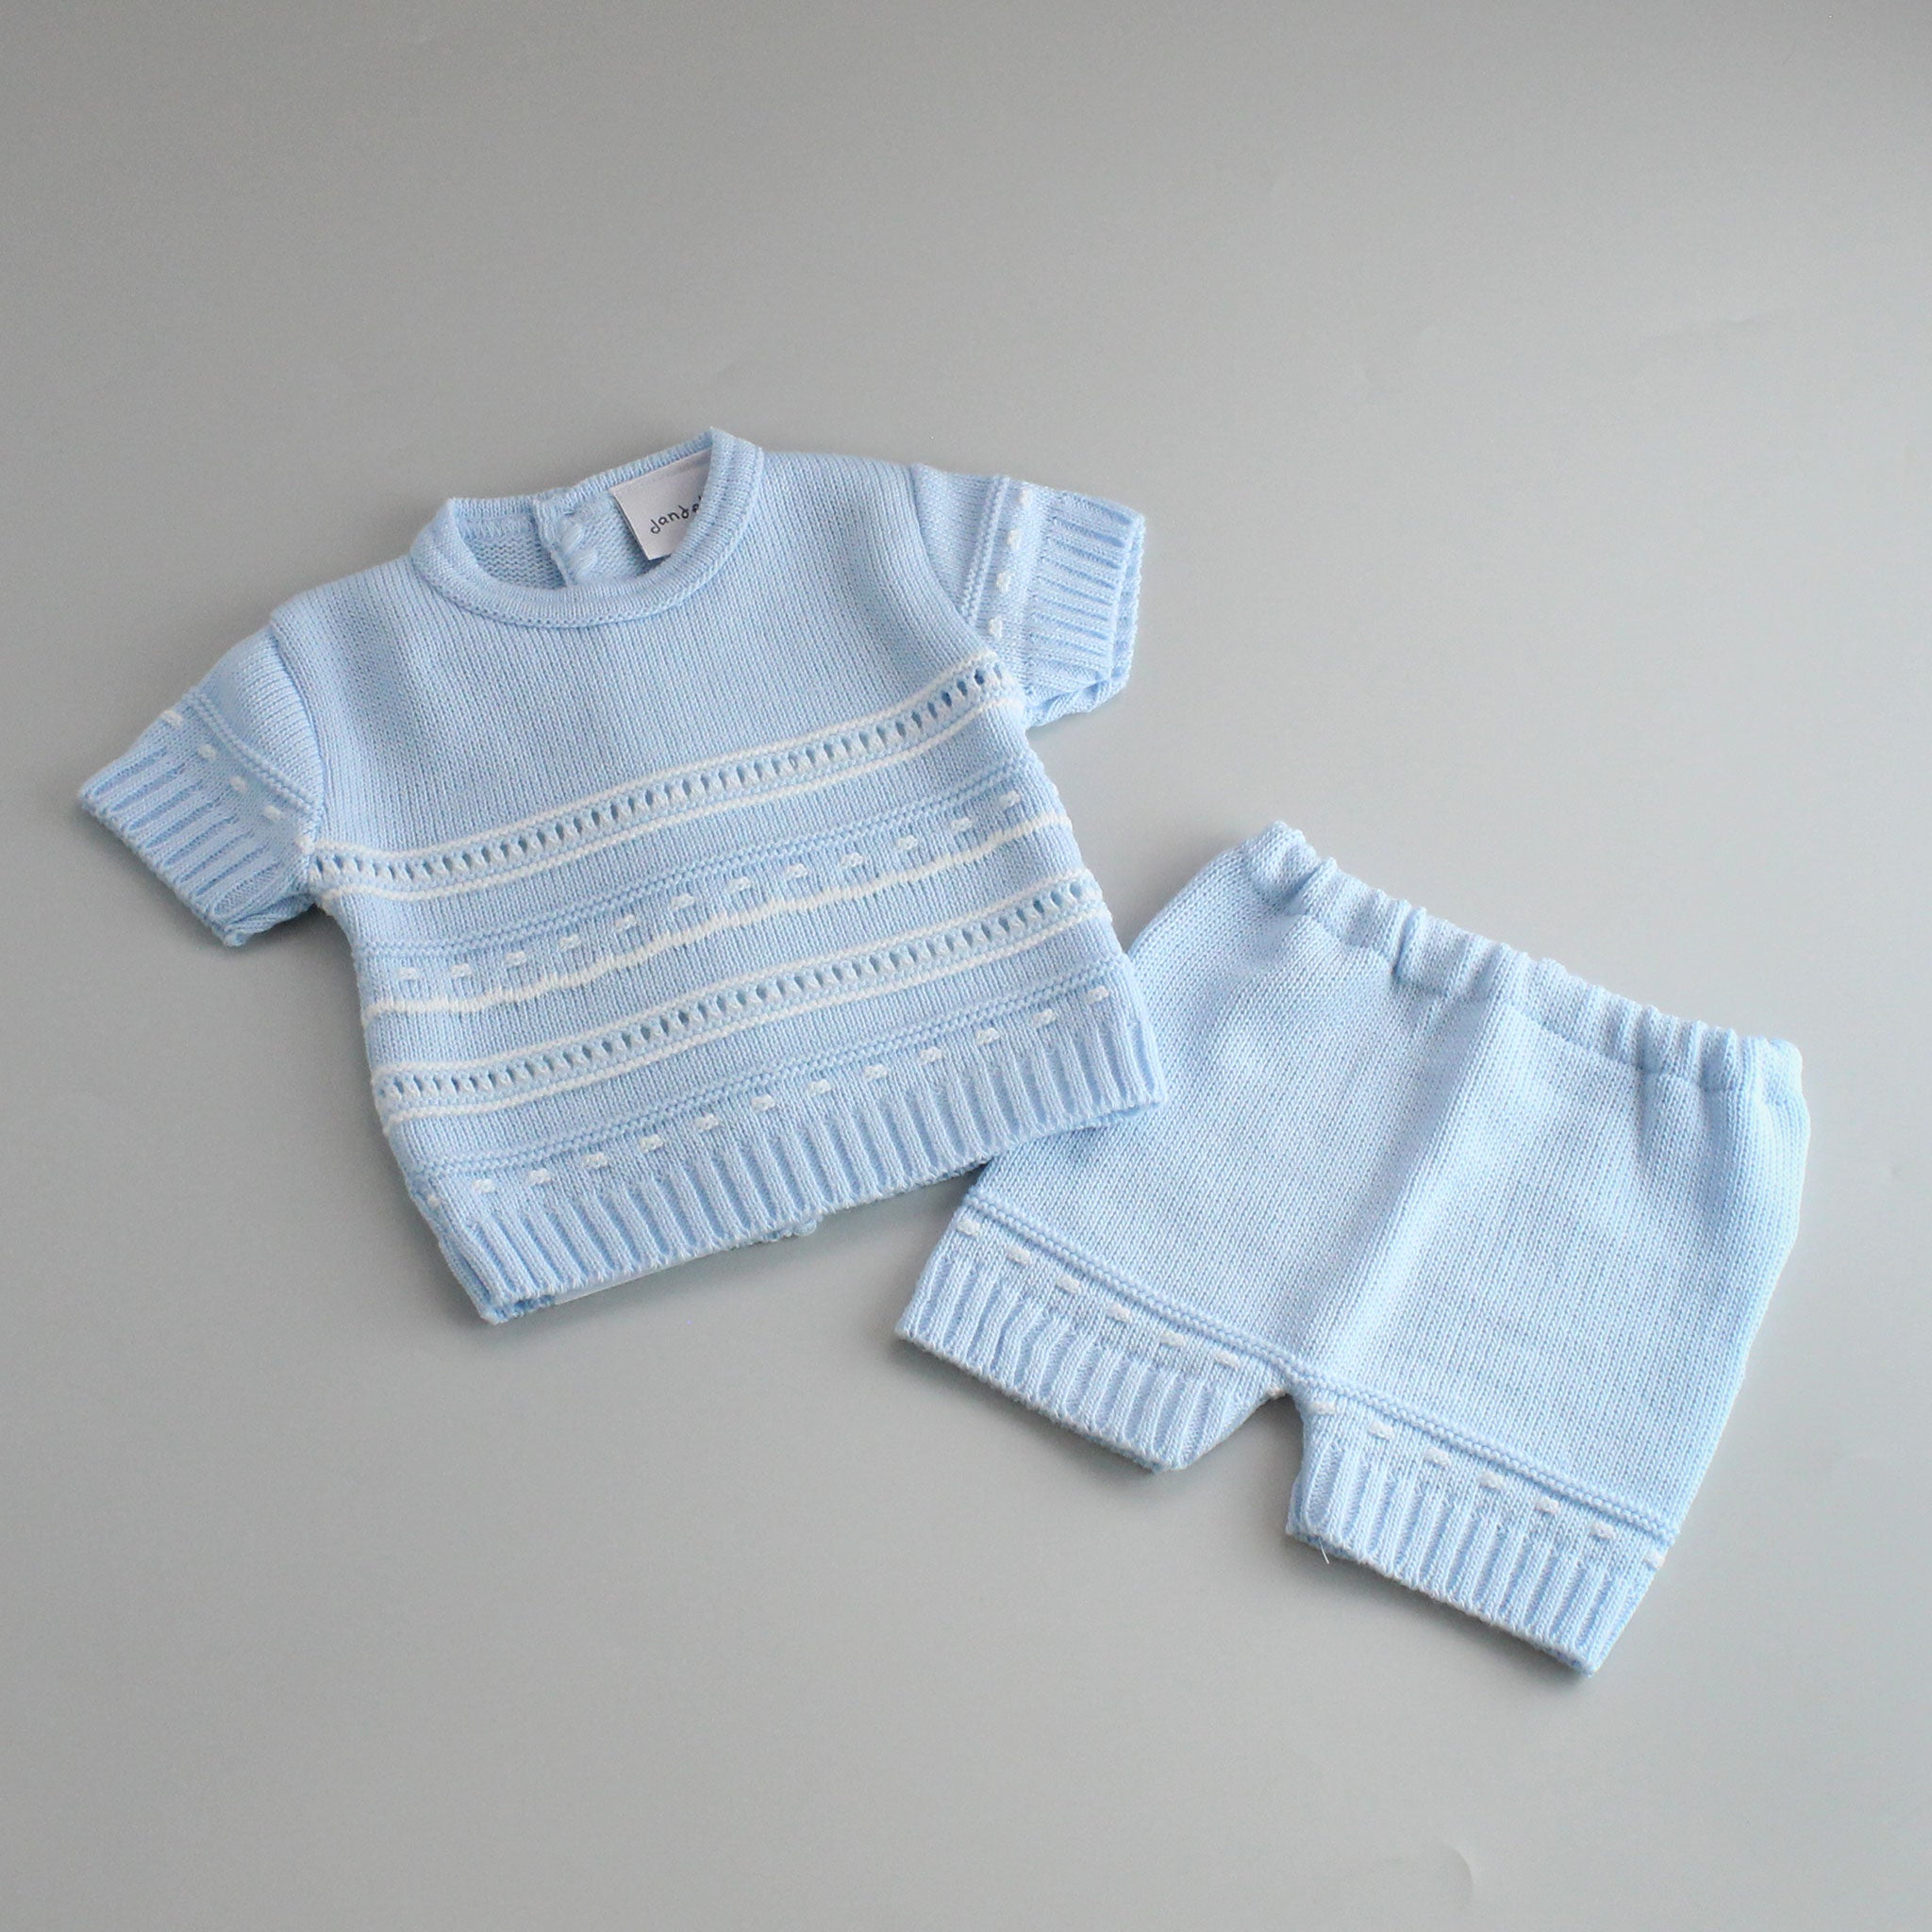 baby boy knitwear knitted top and shorts jam pants blue